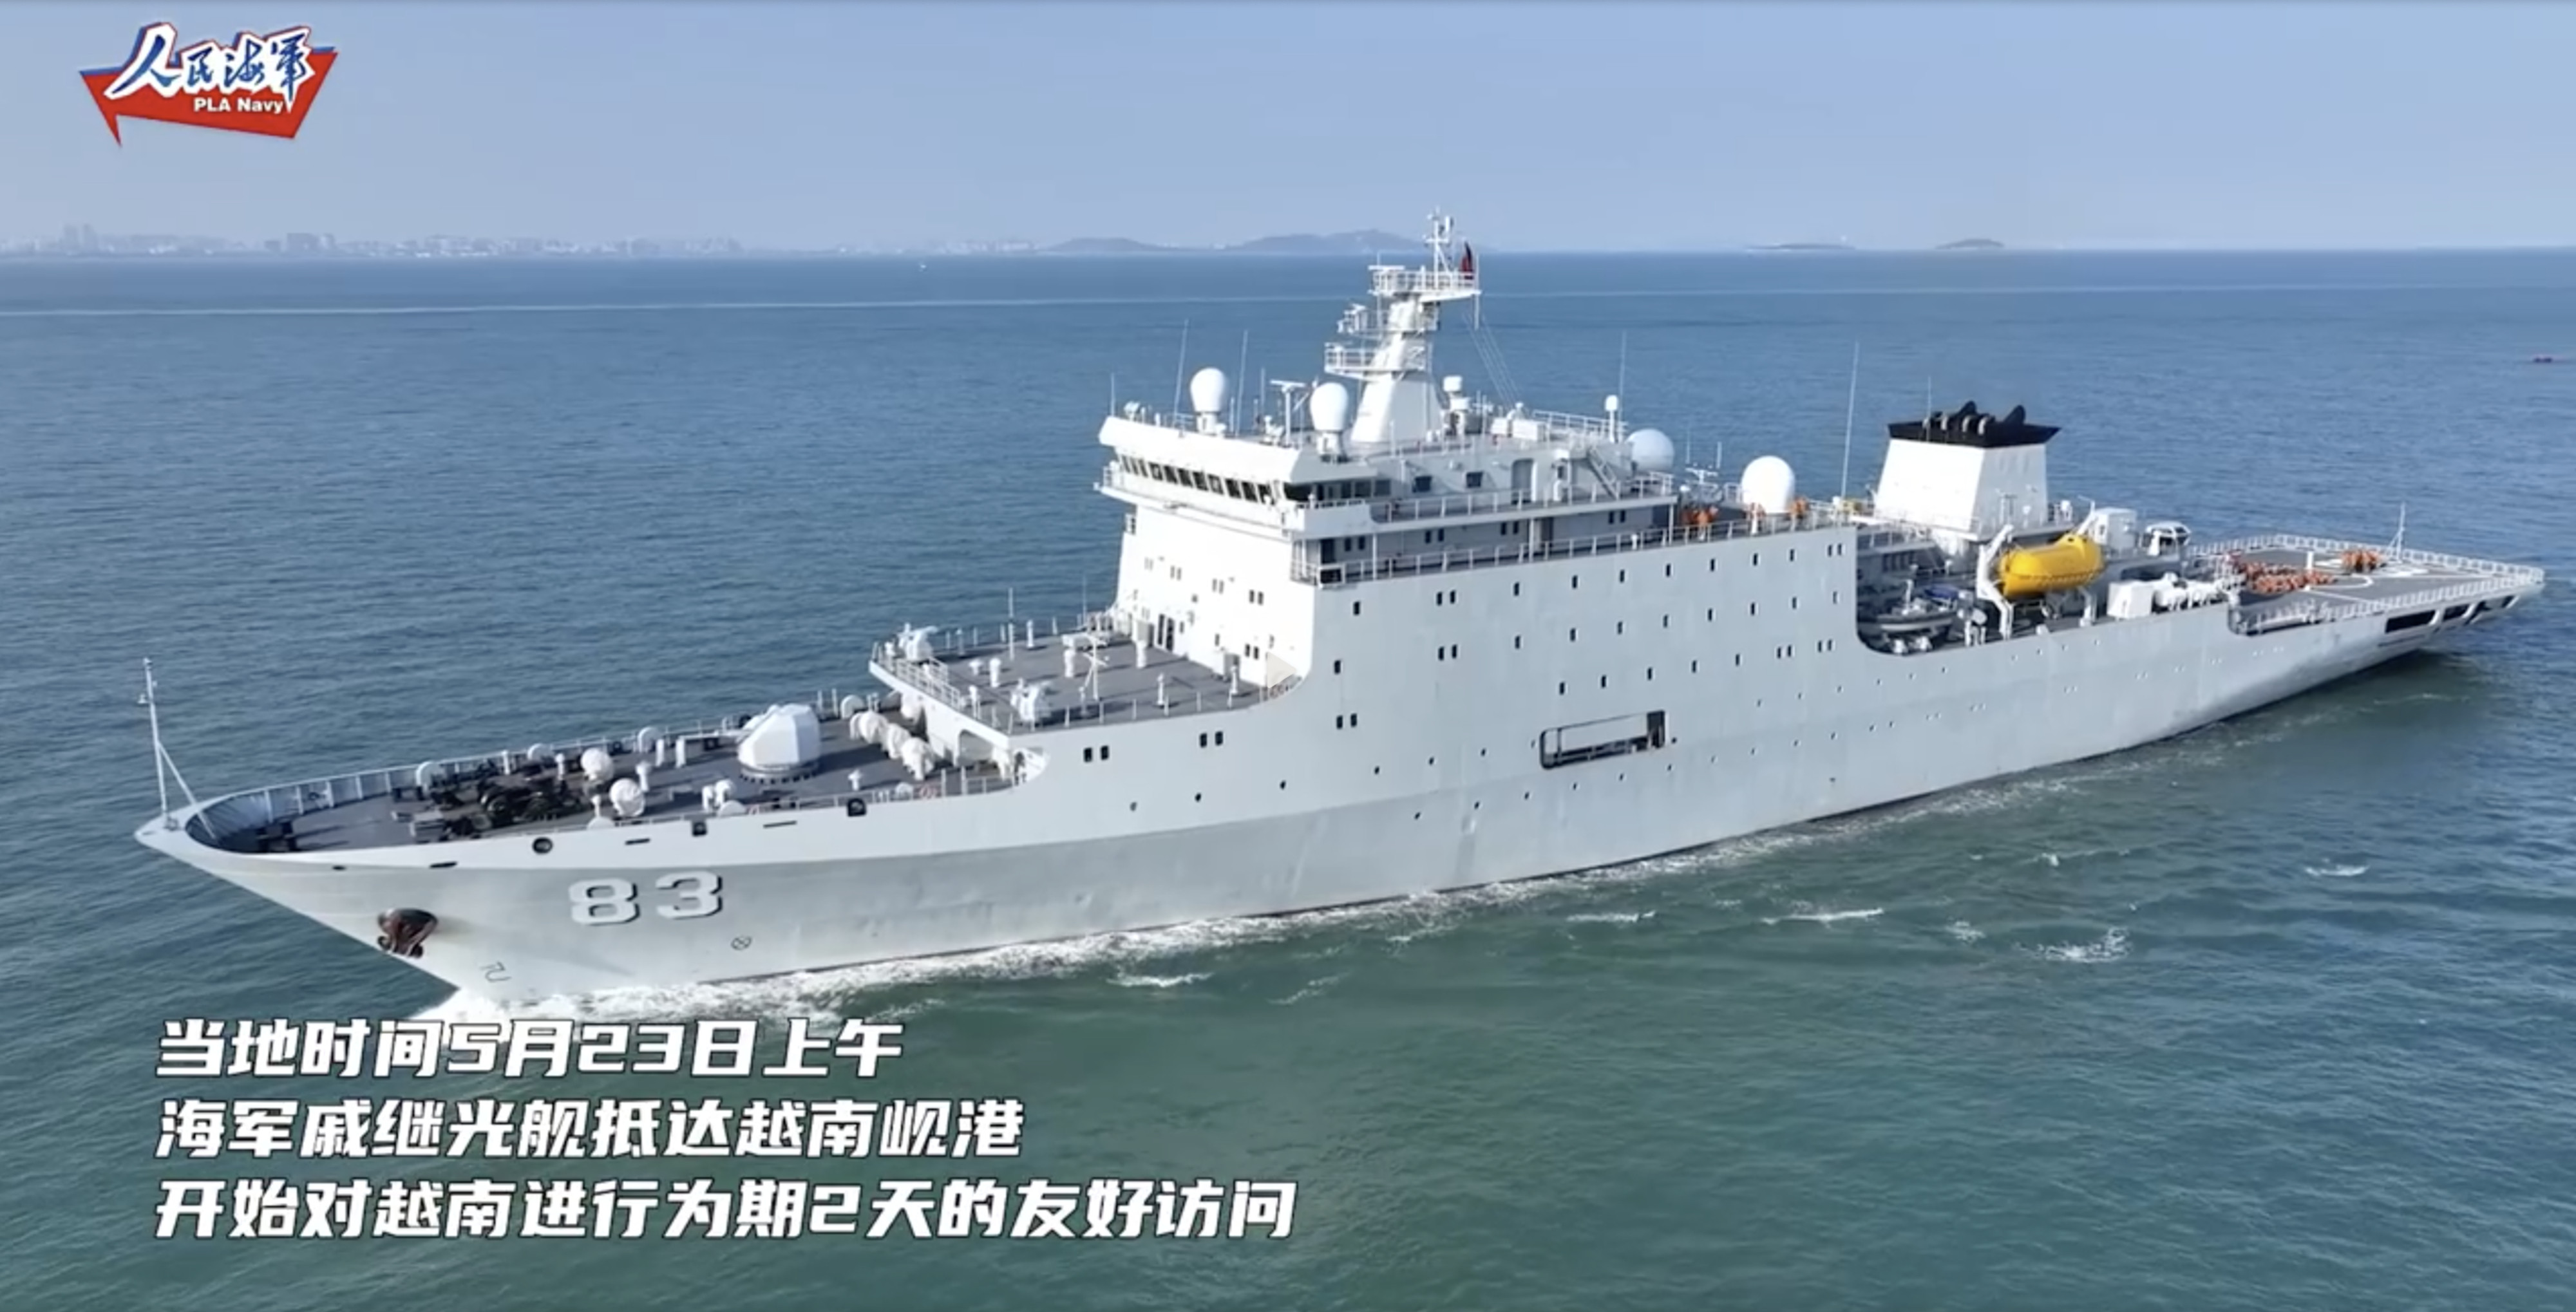 The Qi Jiguang has been used in many military diplomatic missions by China since entering service in 2017. Photo: Weibo